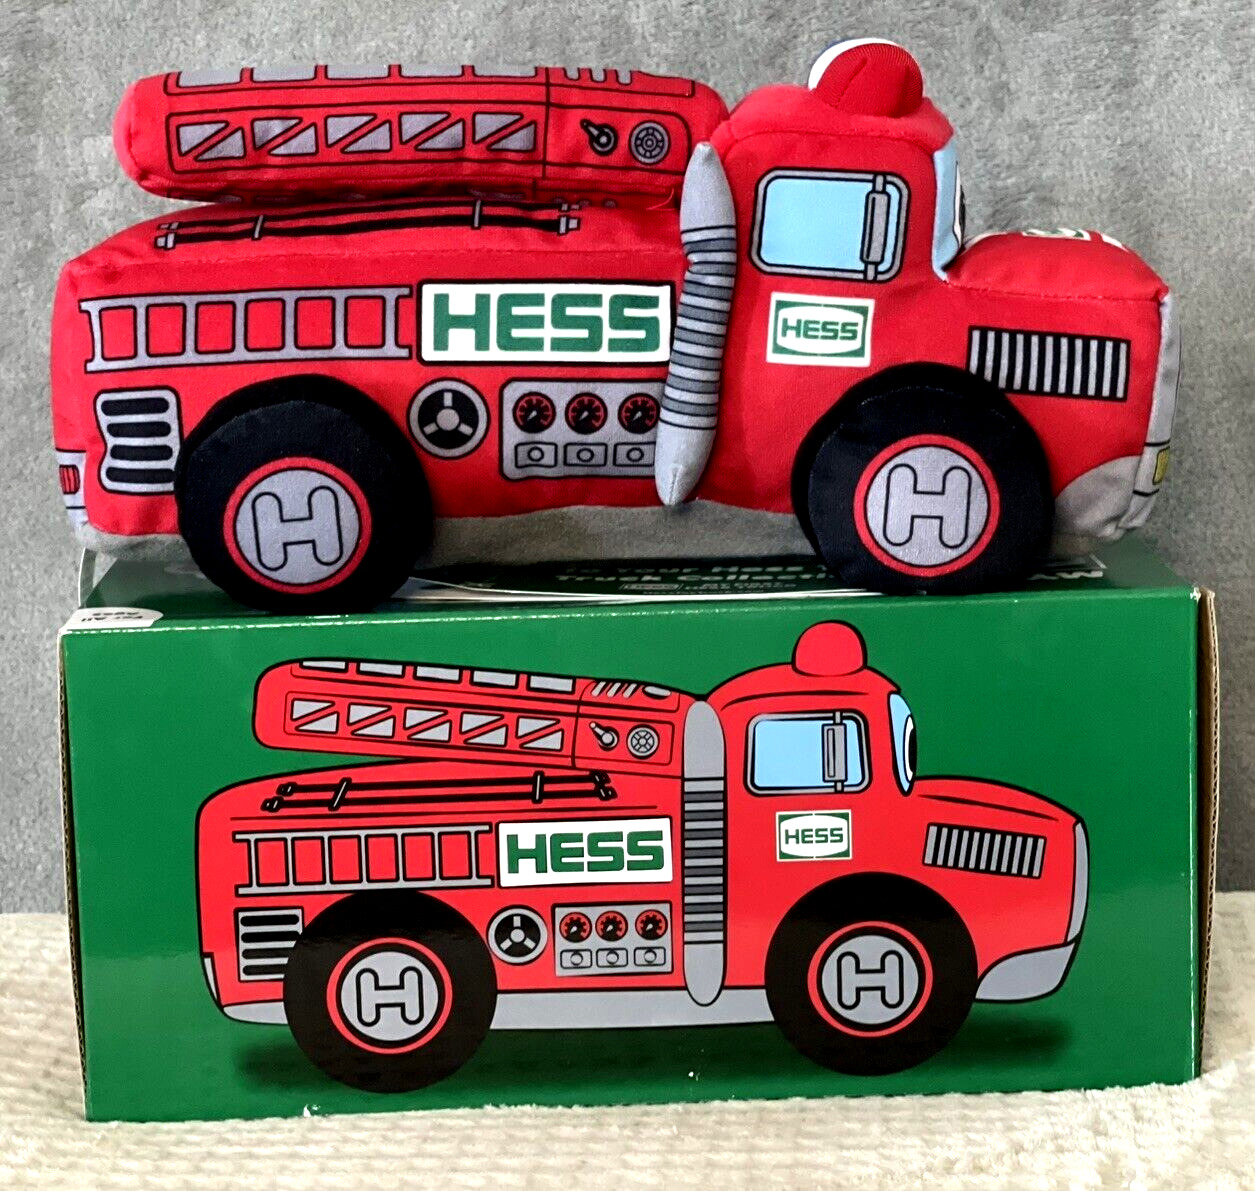 Hess Plush My First Hess Truck 2020 Fire Truck with Lights & Sound